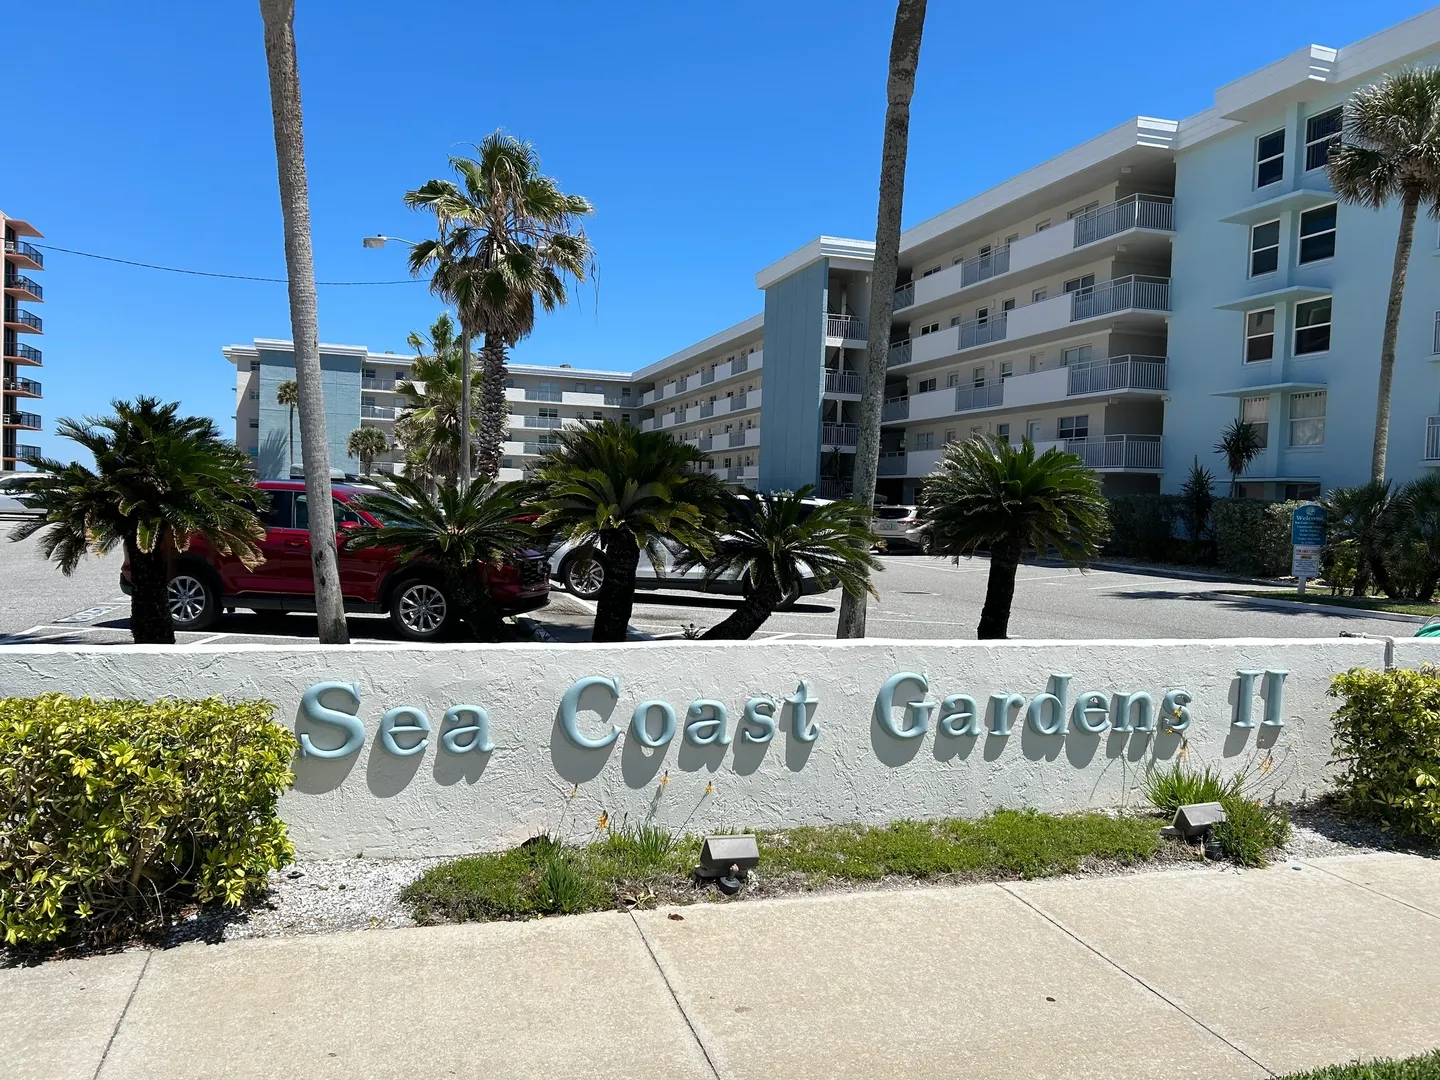 A sign that says see coast gardens